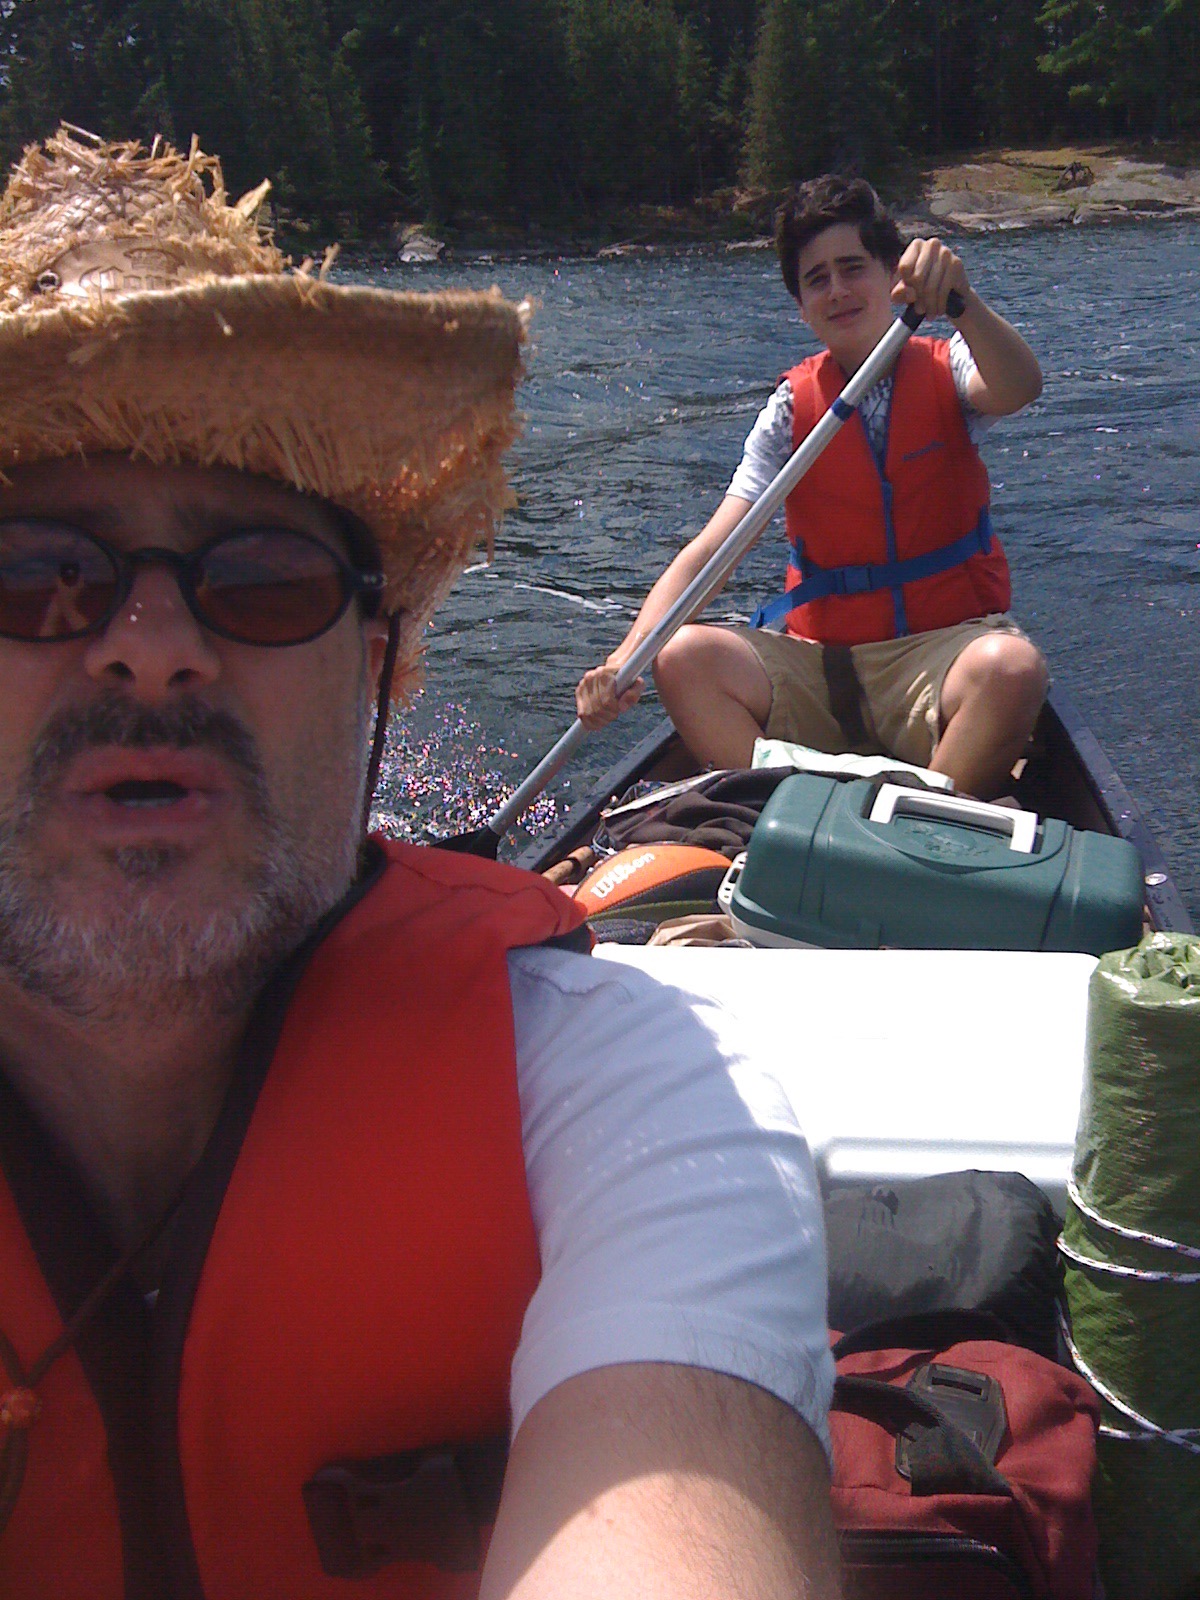 A photo of Peter and Evan on a canoe camping trip in 2010